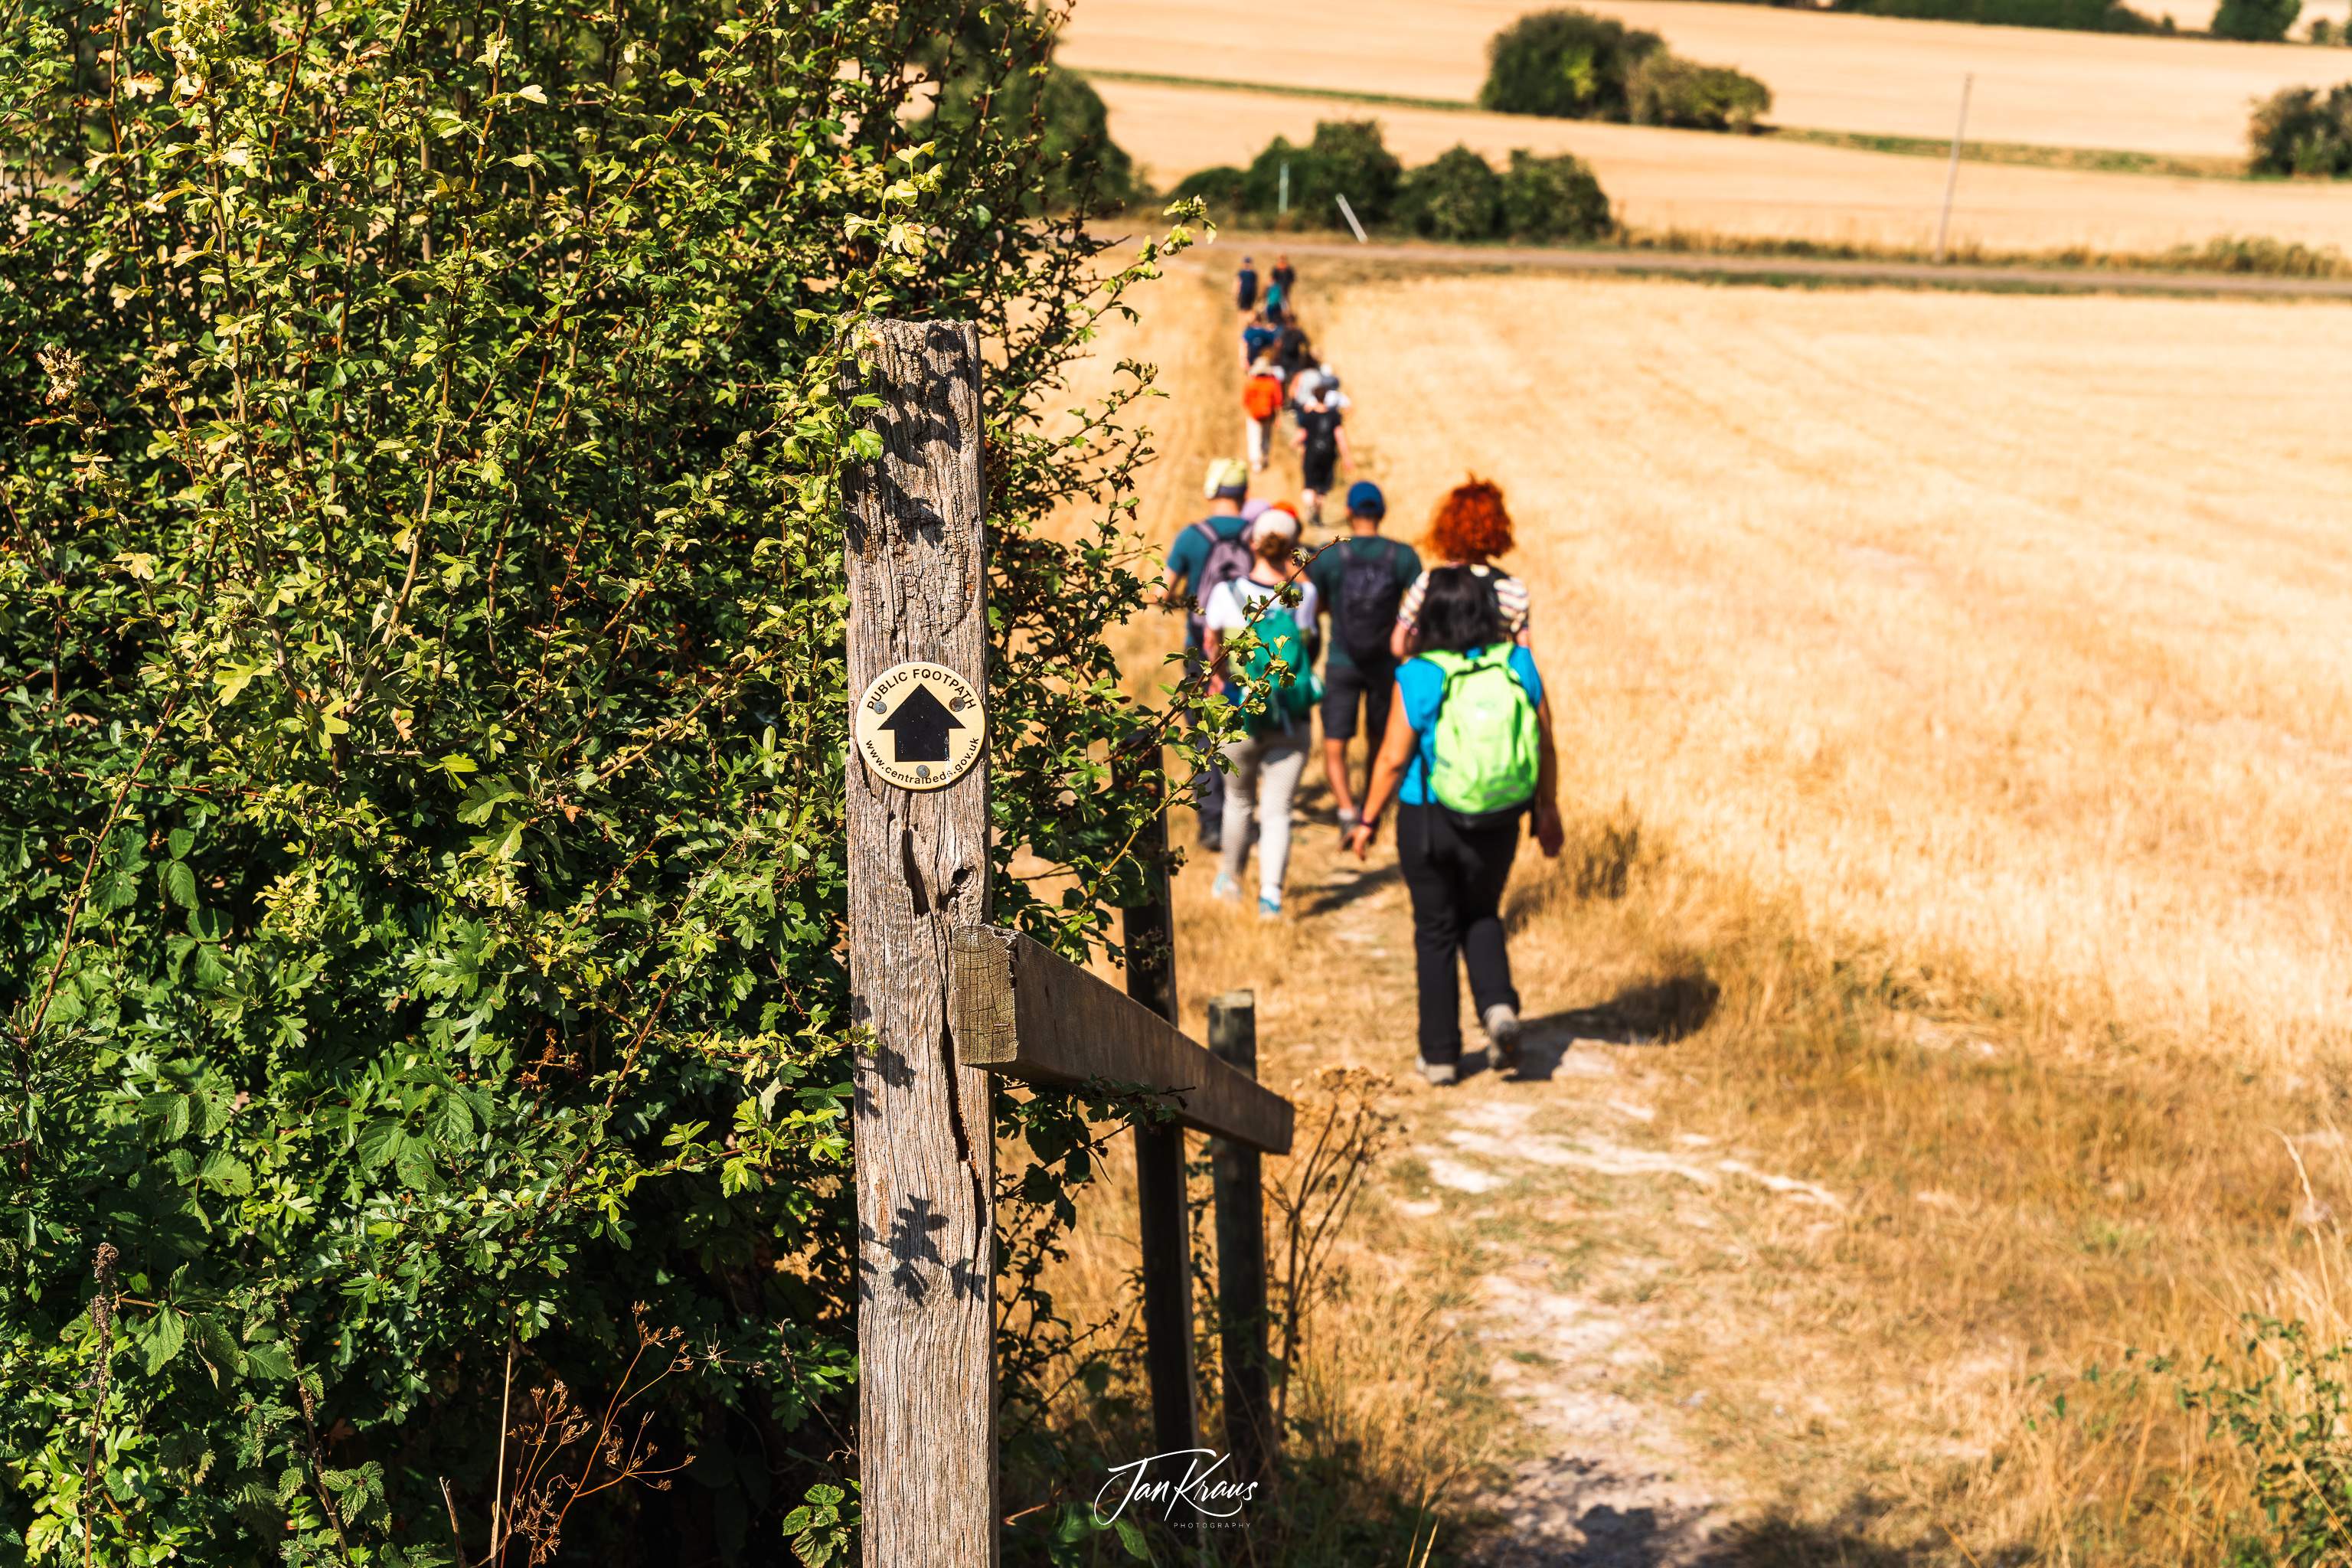 Hikers from Outdooraholics group on the public footpath, Hertfordshire, England, UK